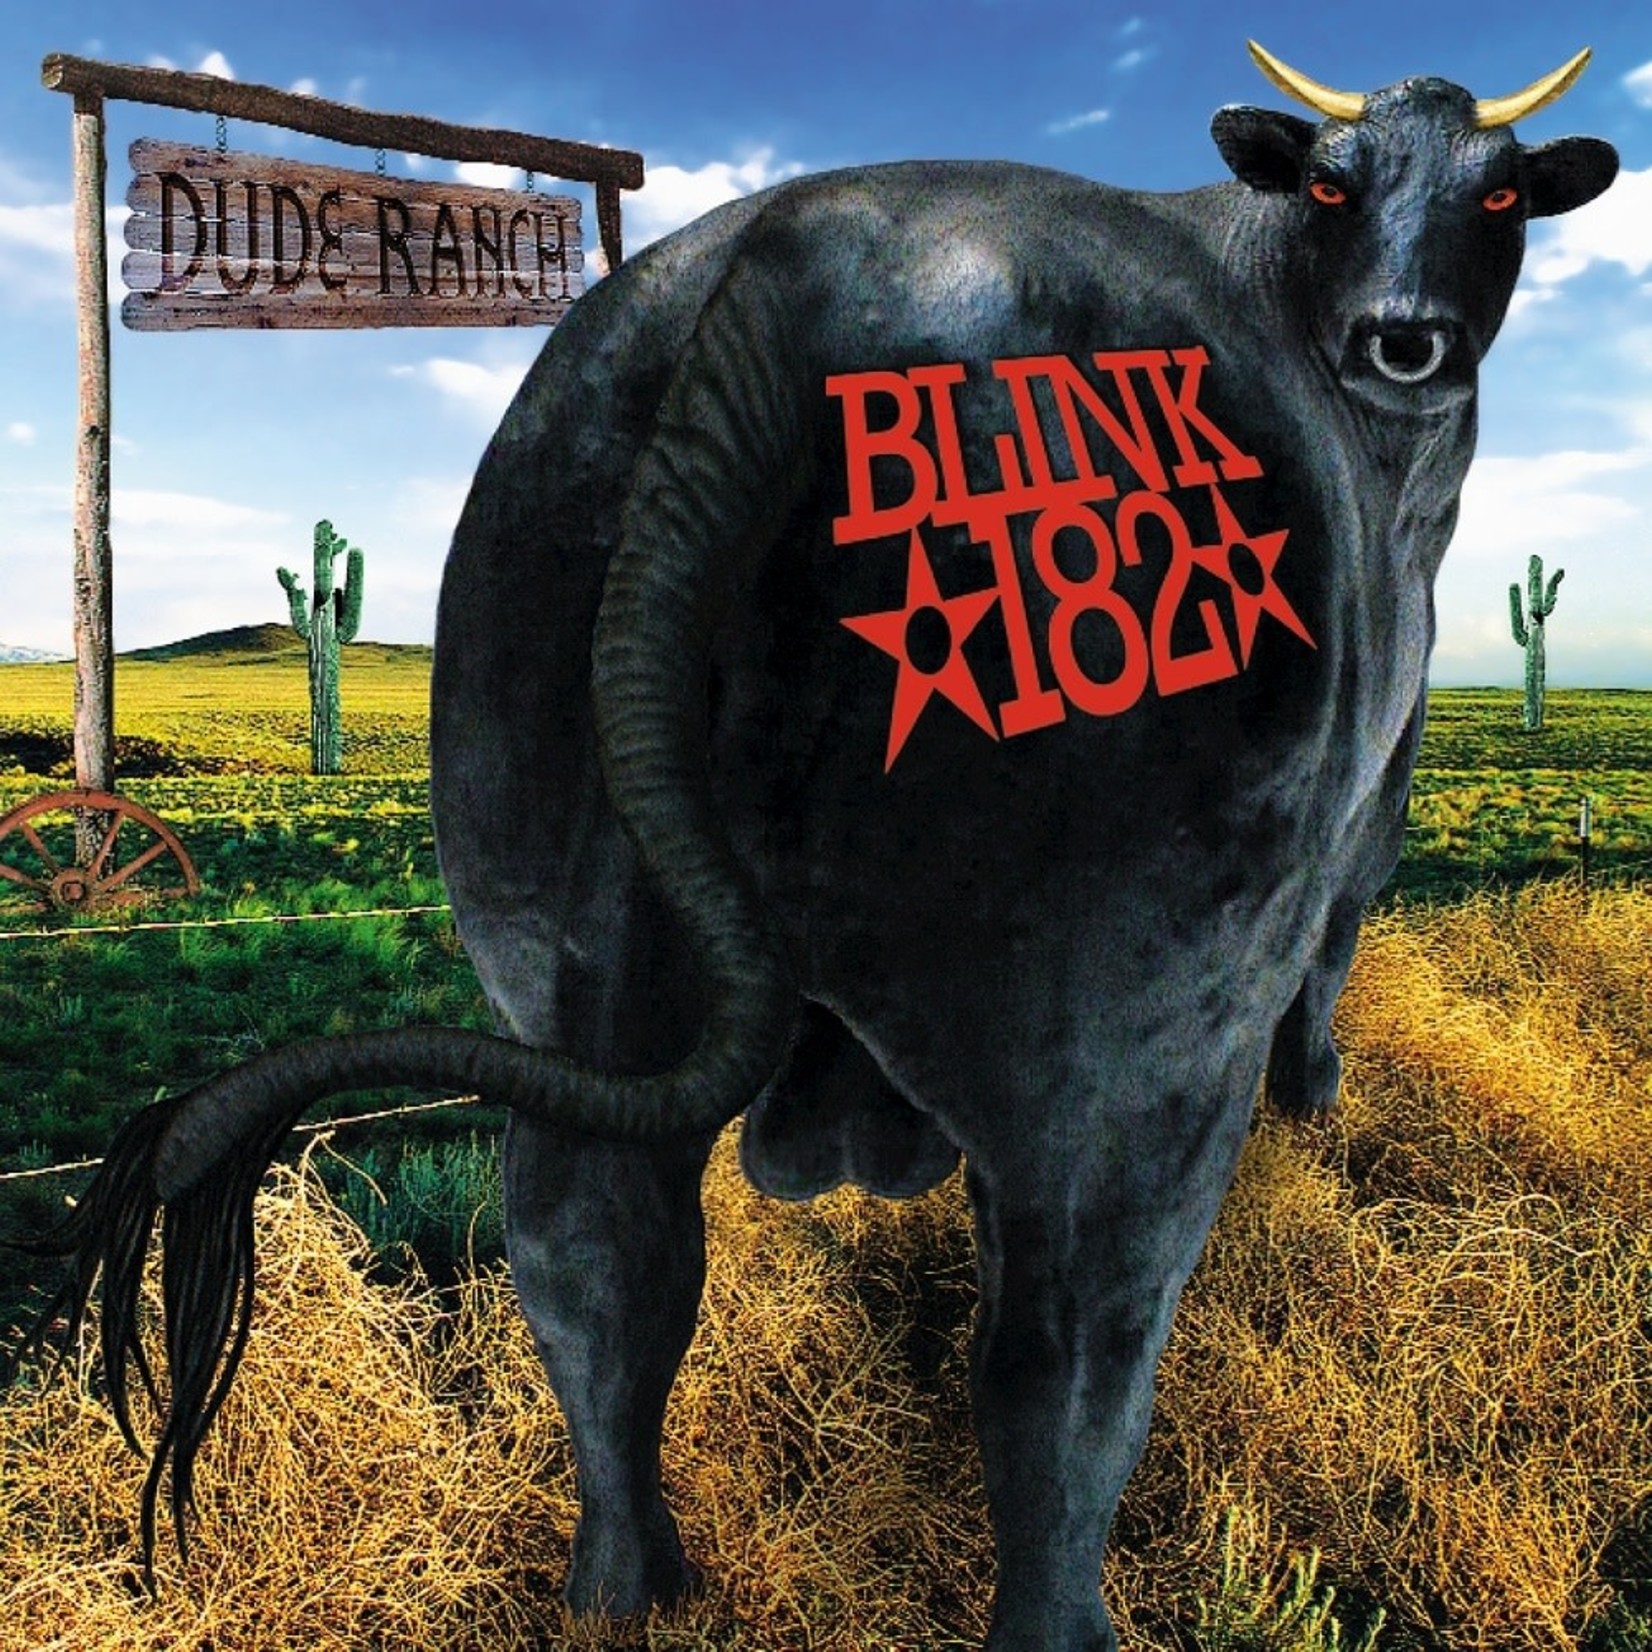 [New] Blink-182 - Dude Ranch